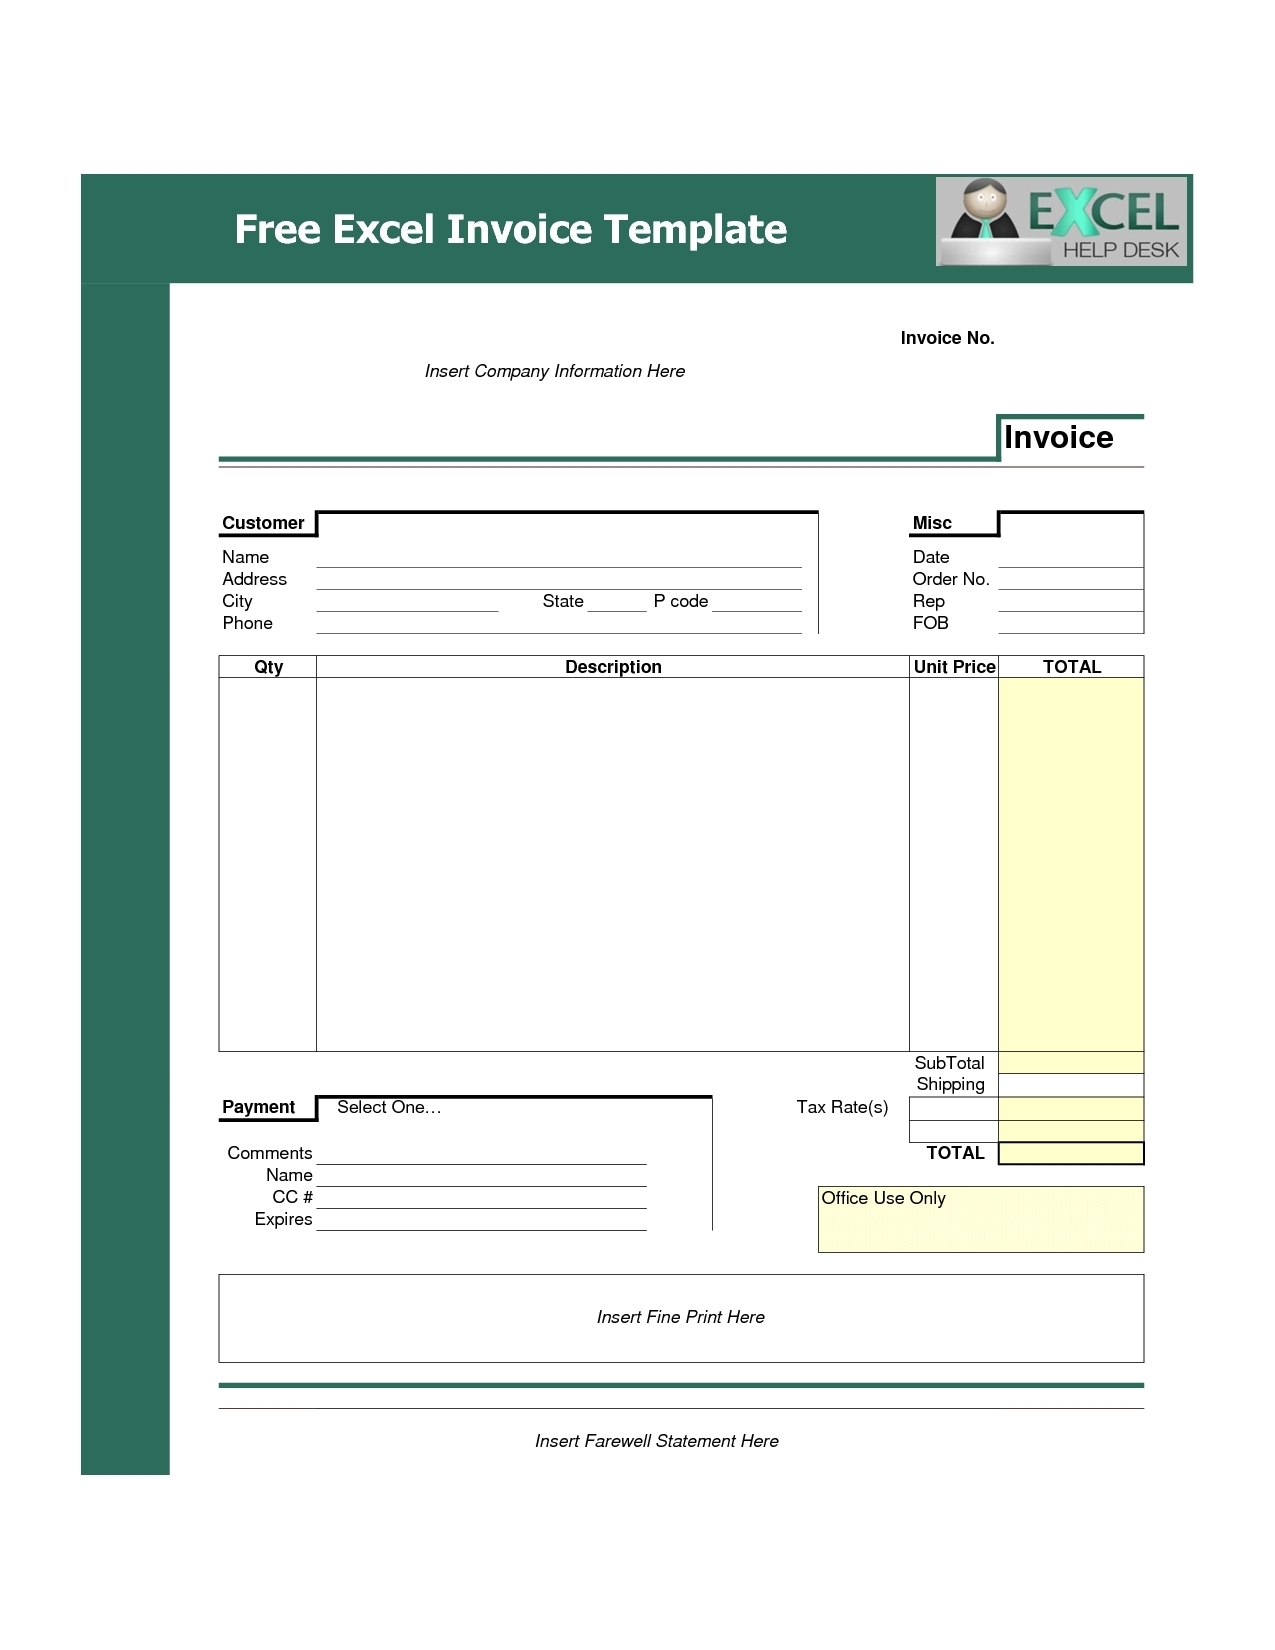 download invoice template excel invoice template free 2016 invoice template free download excel